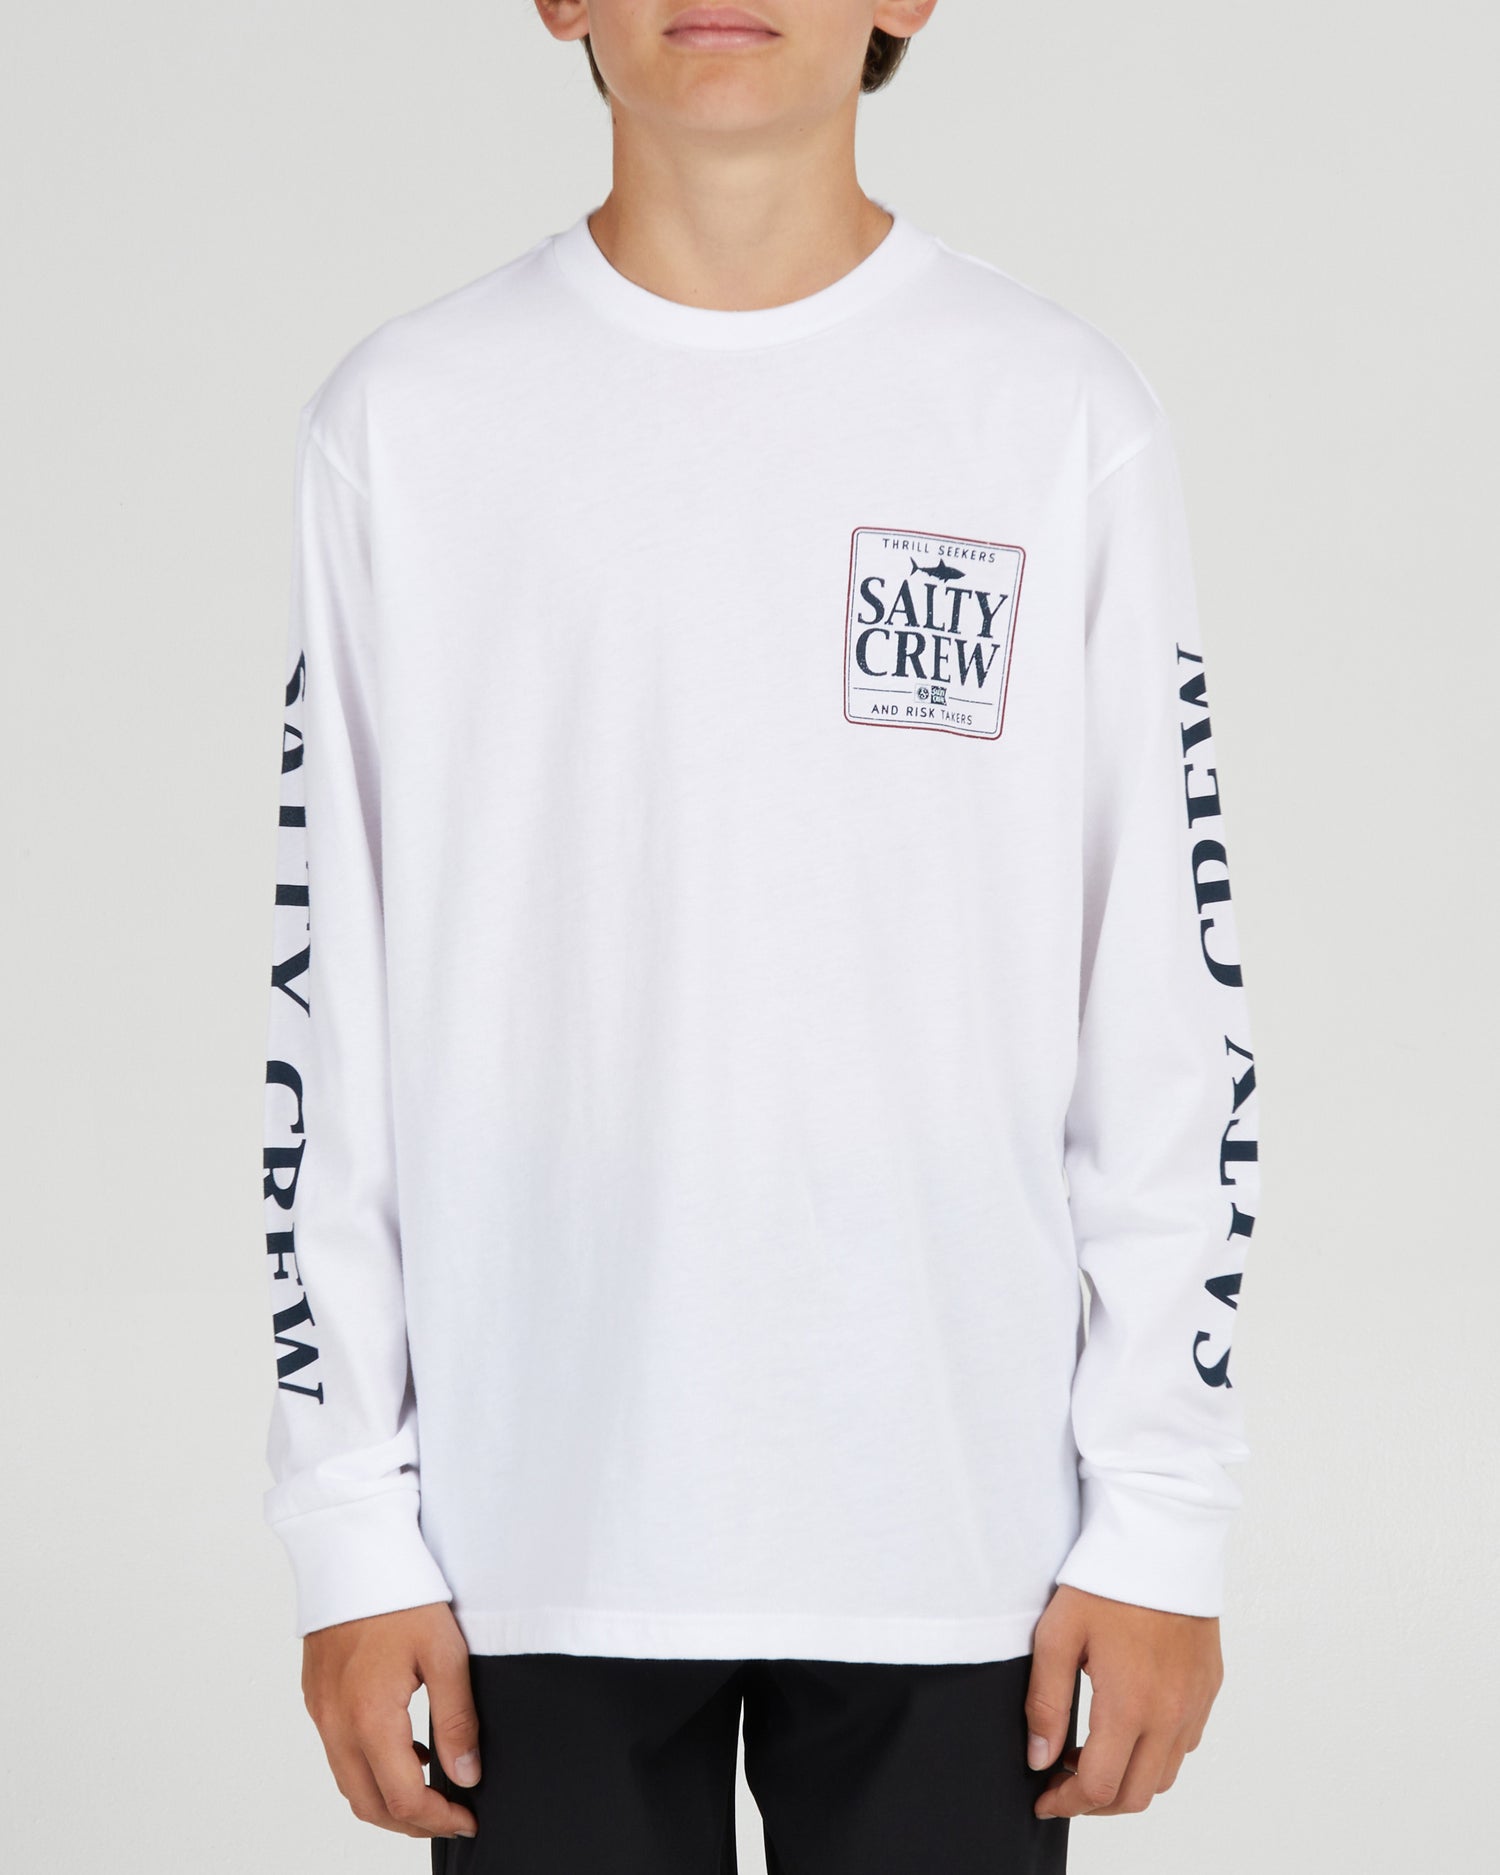 On body front of the Coaster Boys White L/S Tee